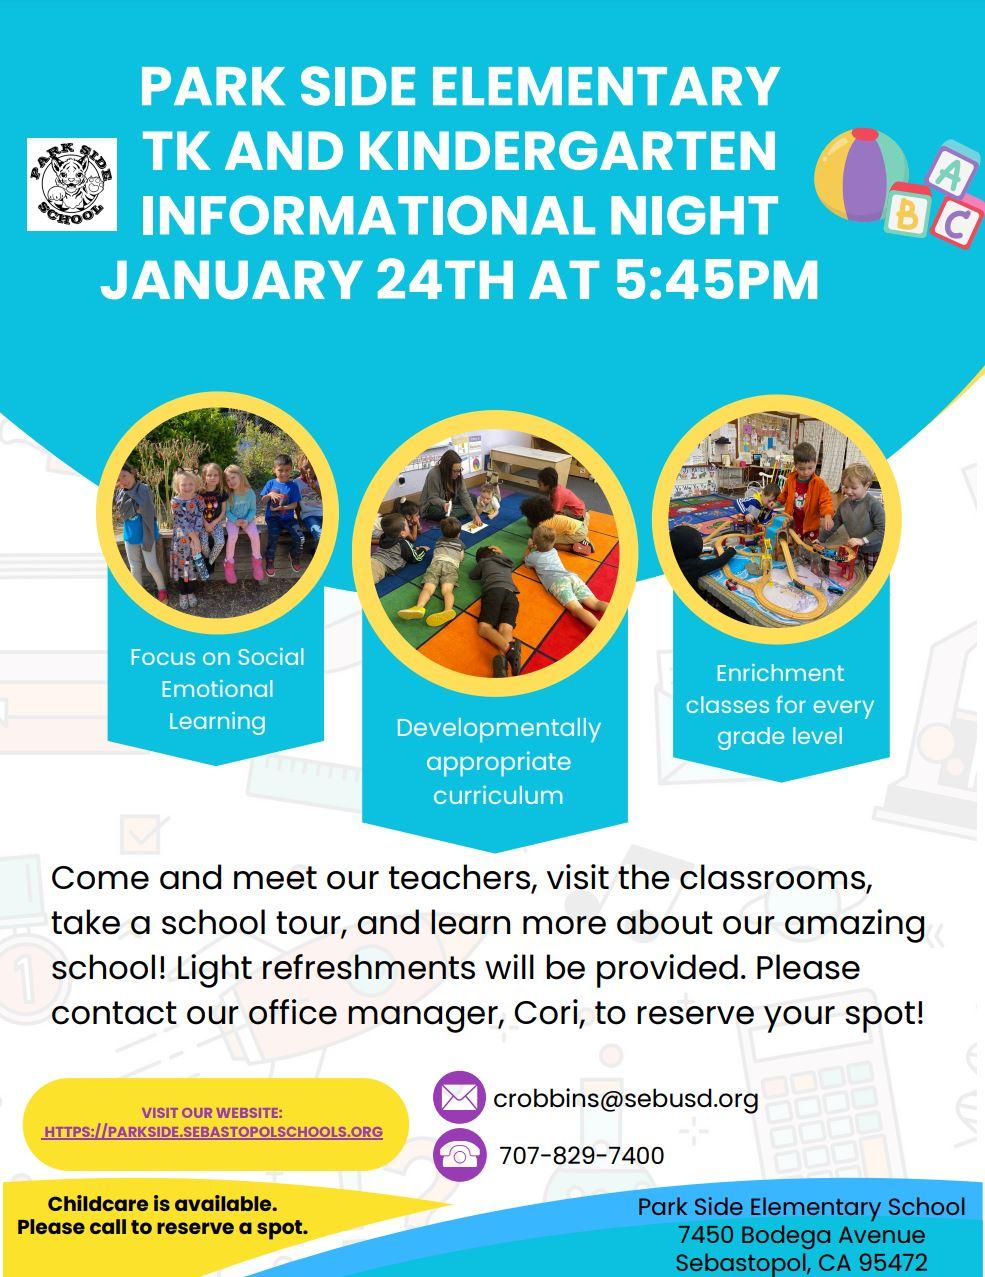 TK AND KINDERGARTEN INFORMATIONAL NIGHT JANUARY 24TH AT 5:45PM